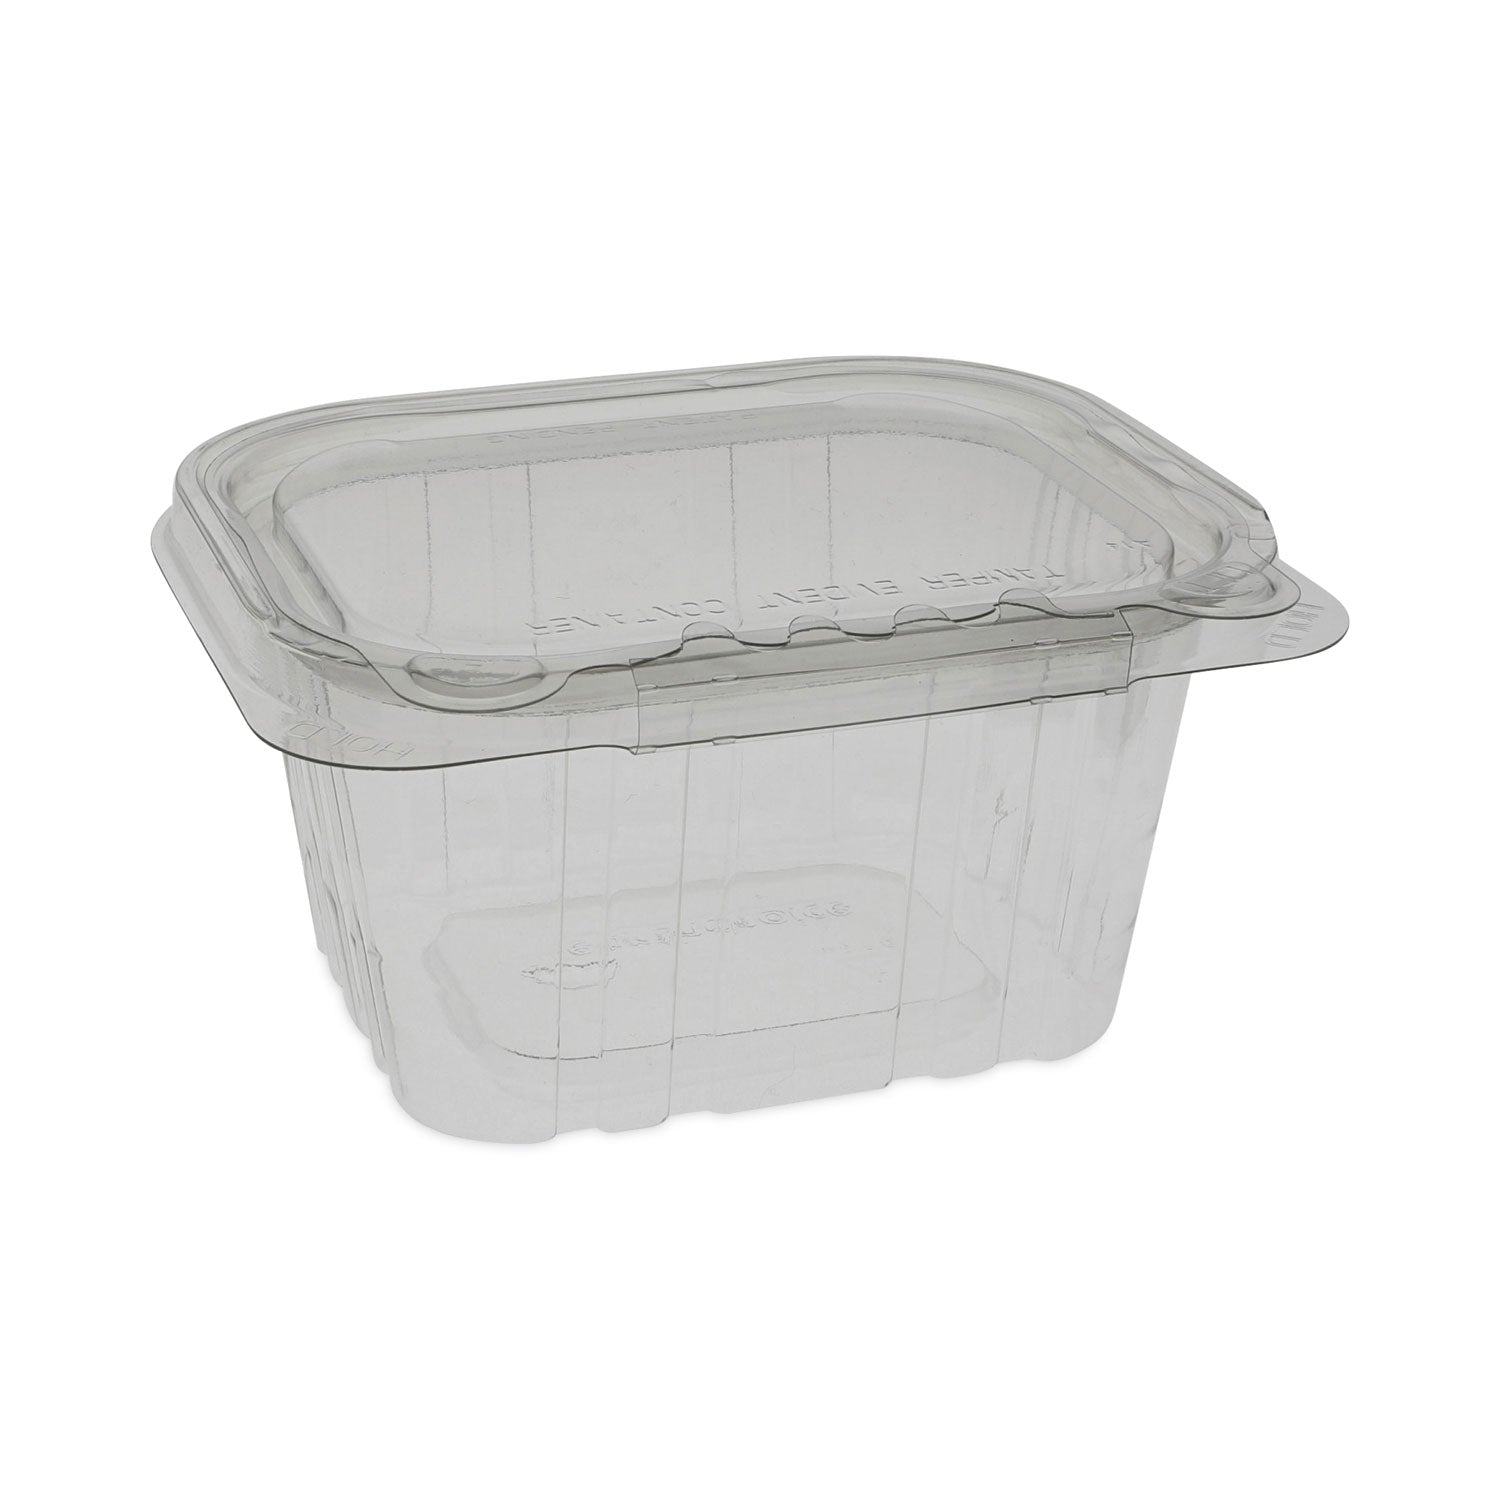 earthchoice-tamper-evident-recycled-hinged-lid-deli-container-16-oz-538-x-45-x-263-clear-plastic-304-carton_pcttehl5x416 - 2